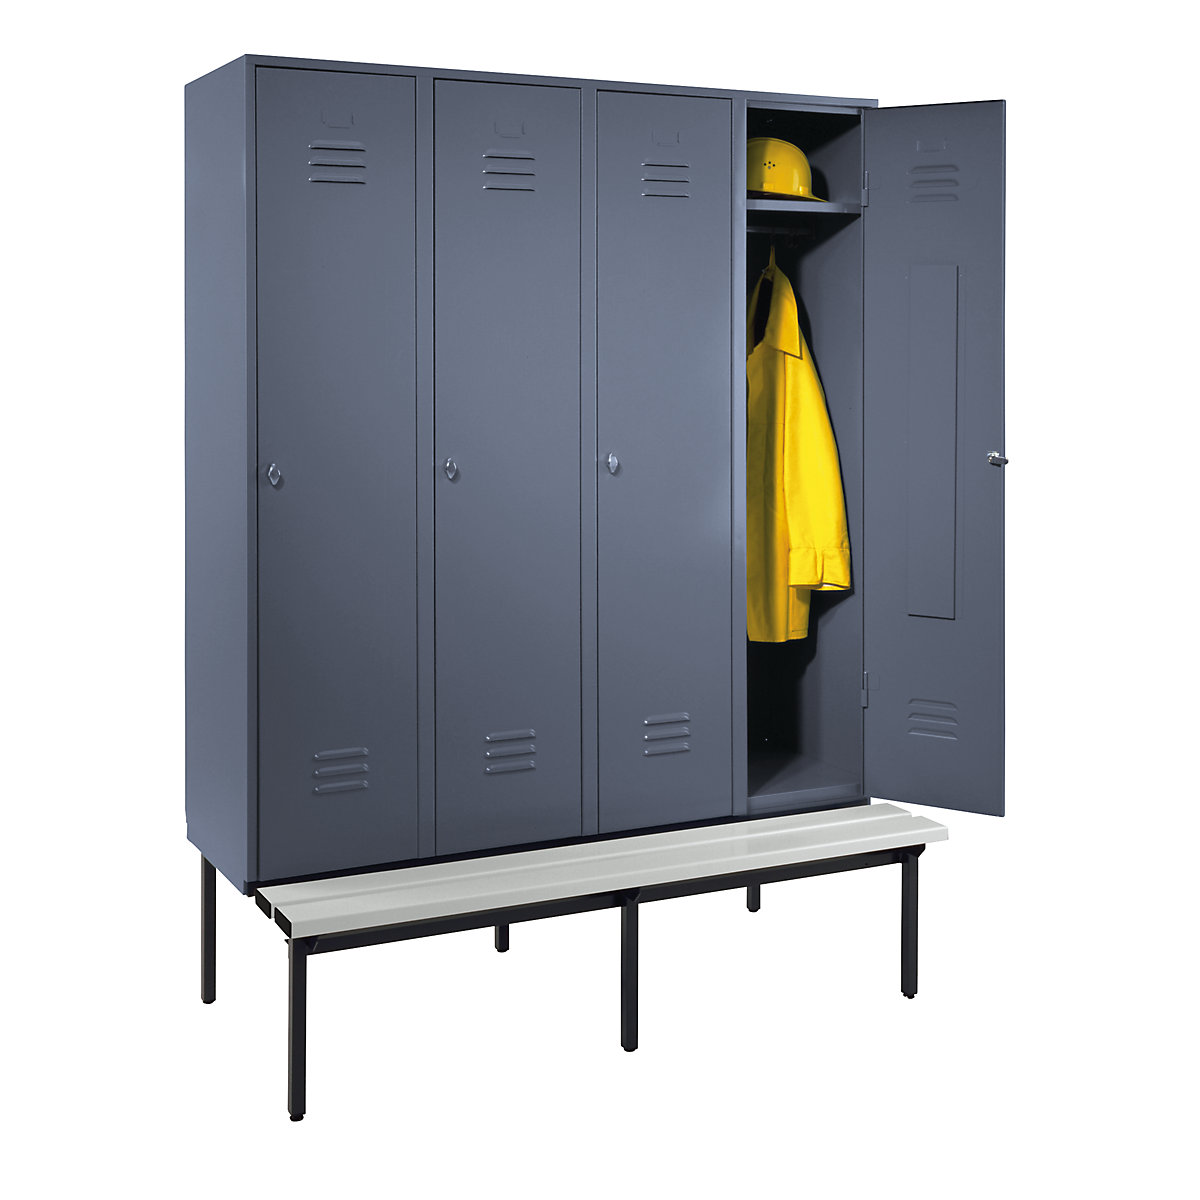 Clothes locker with bench mounted underneath – Wolf